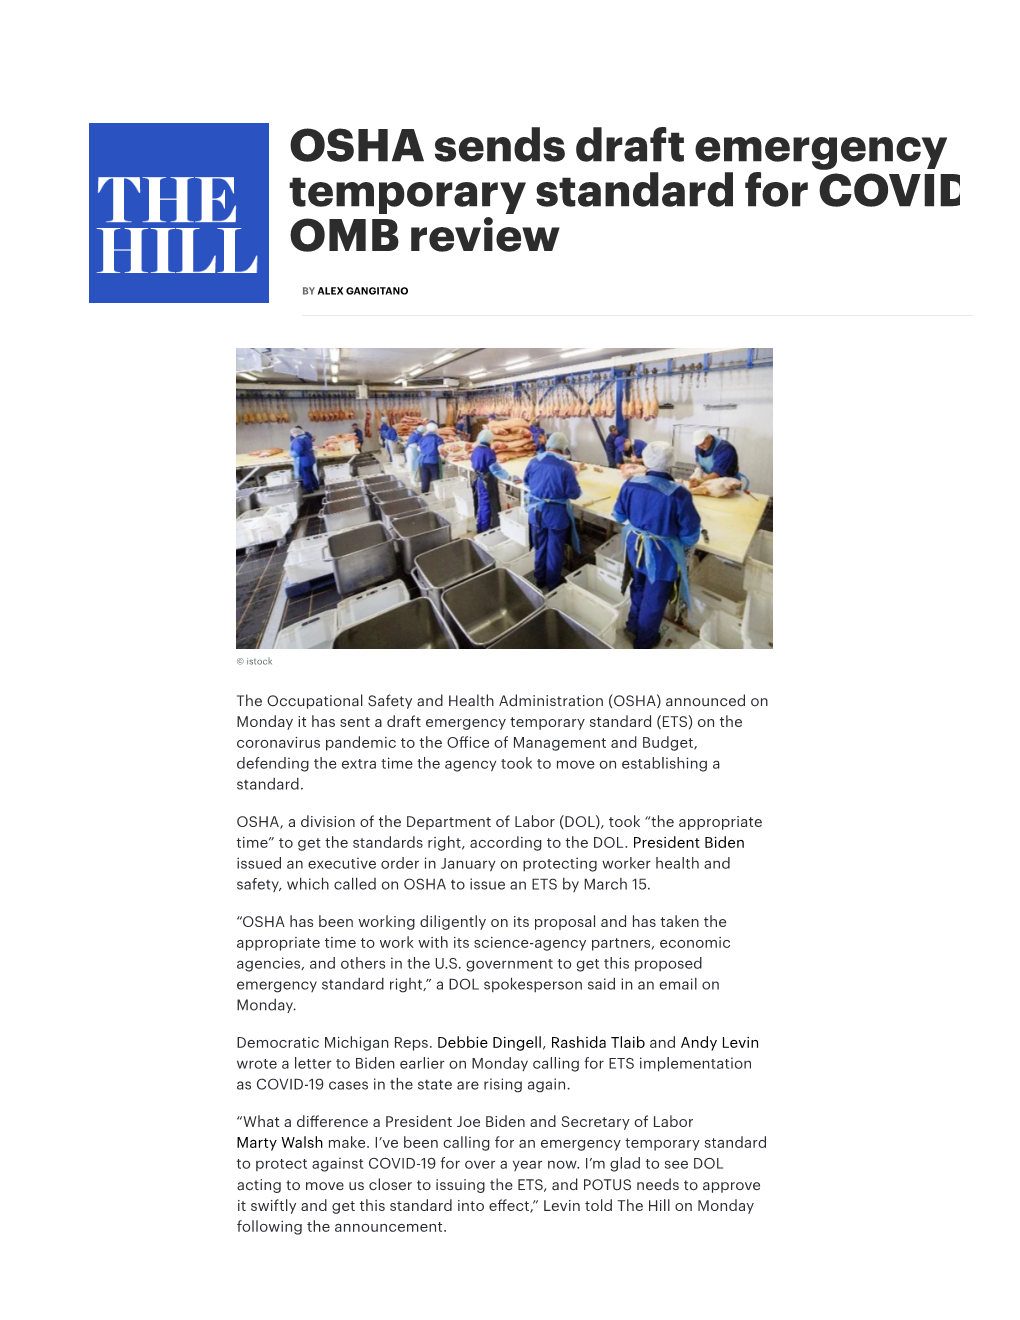 OSHA Sends Draft Emergency Temporary Standard for COVID OMB Review